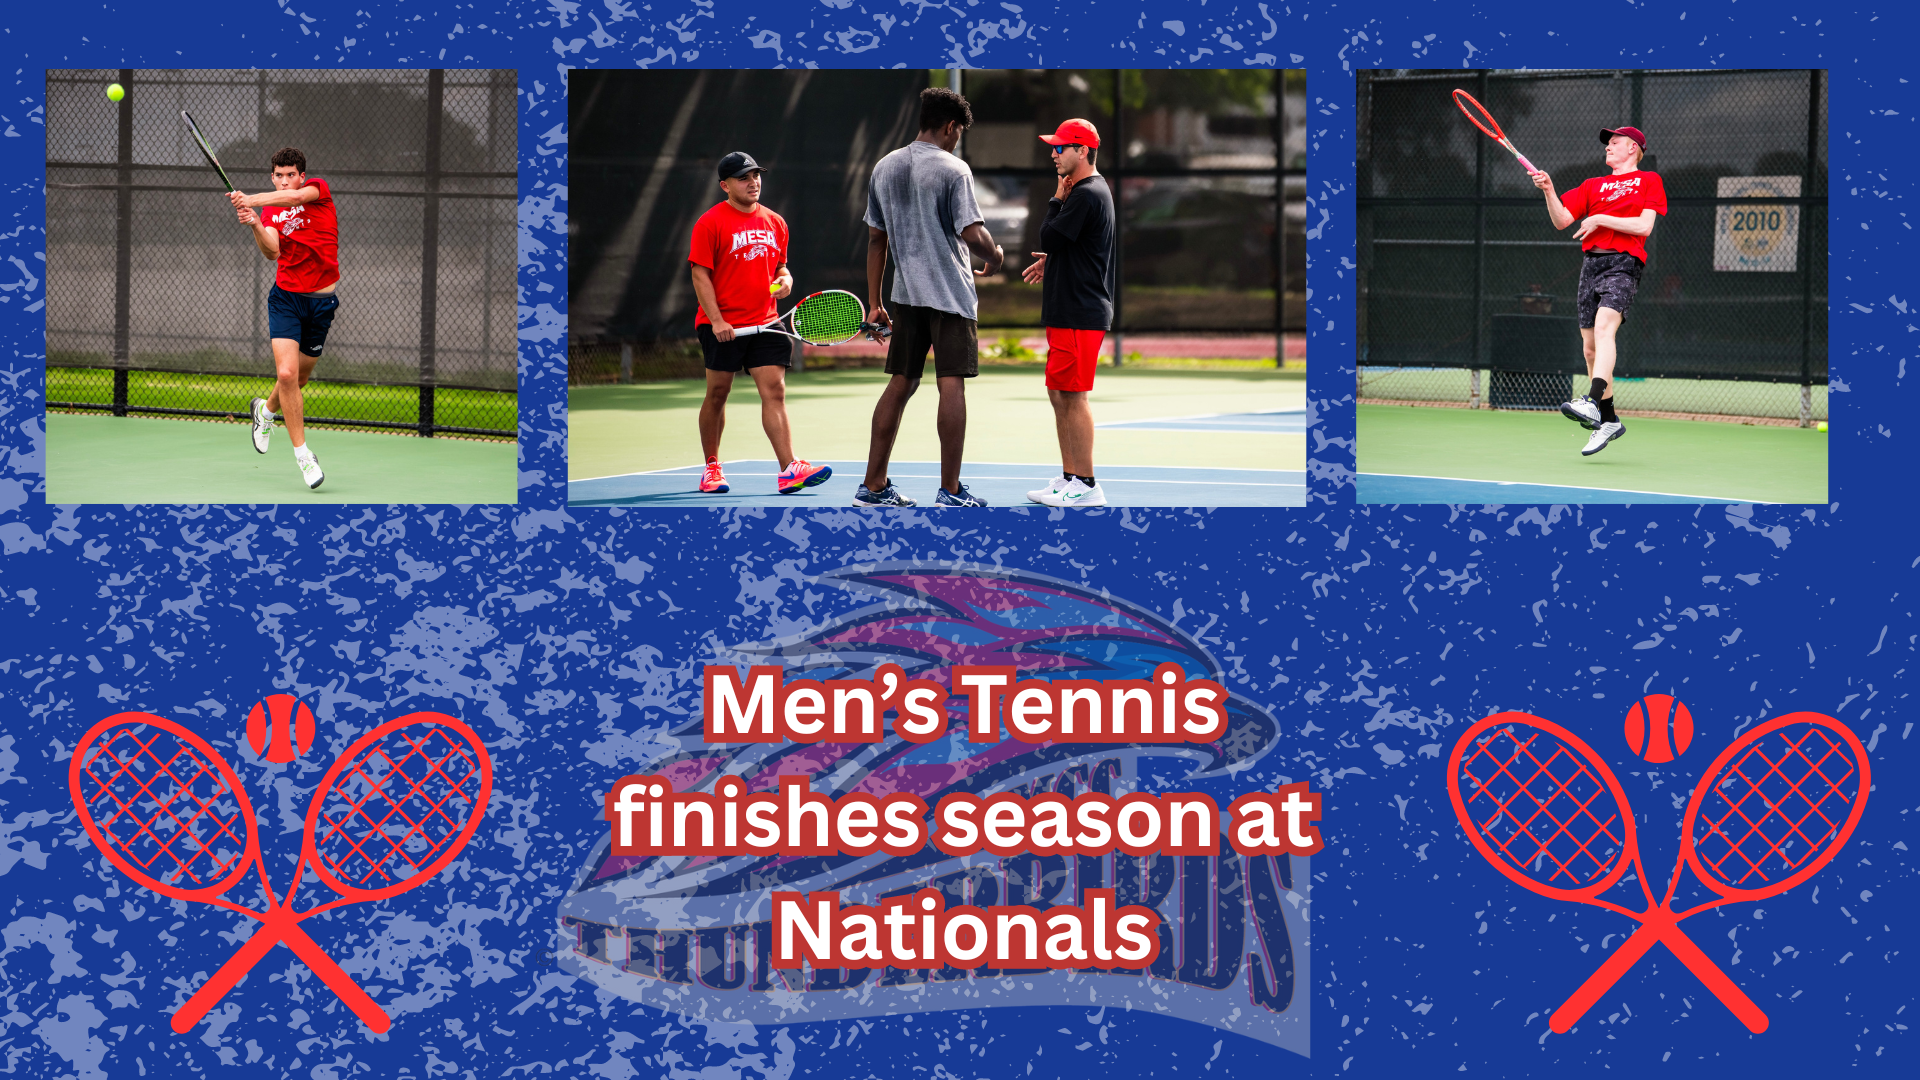 Men's Tennis wrapped up their season at Nationals over the weekend